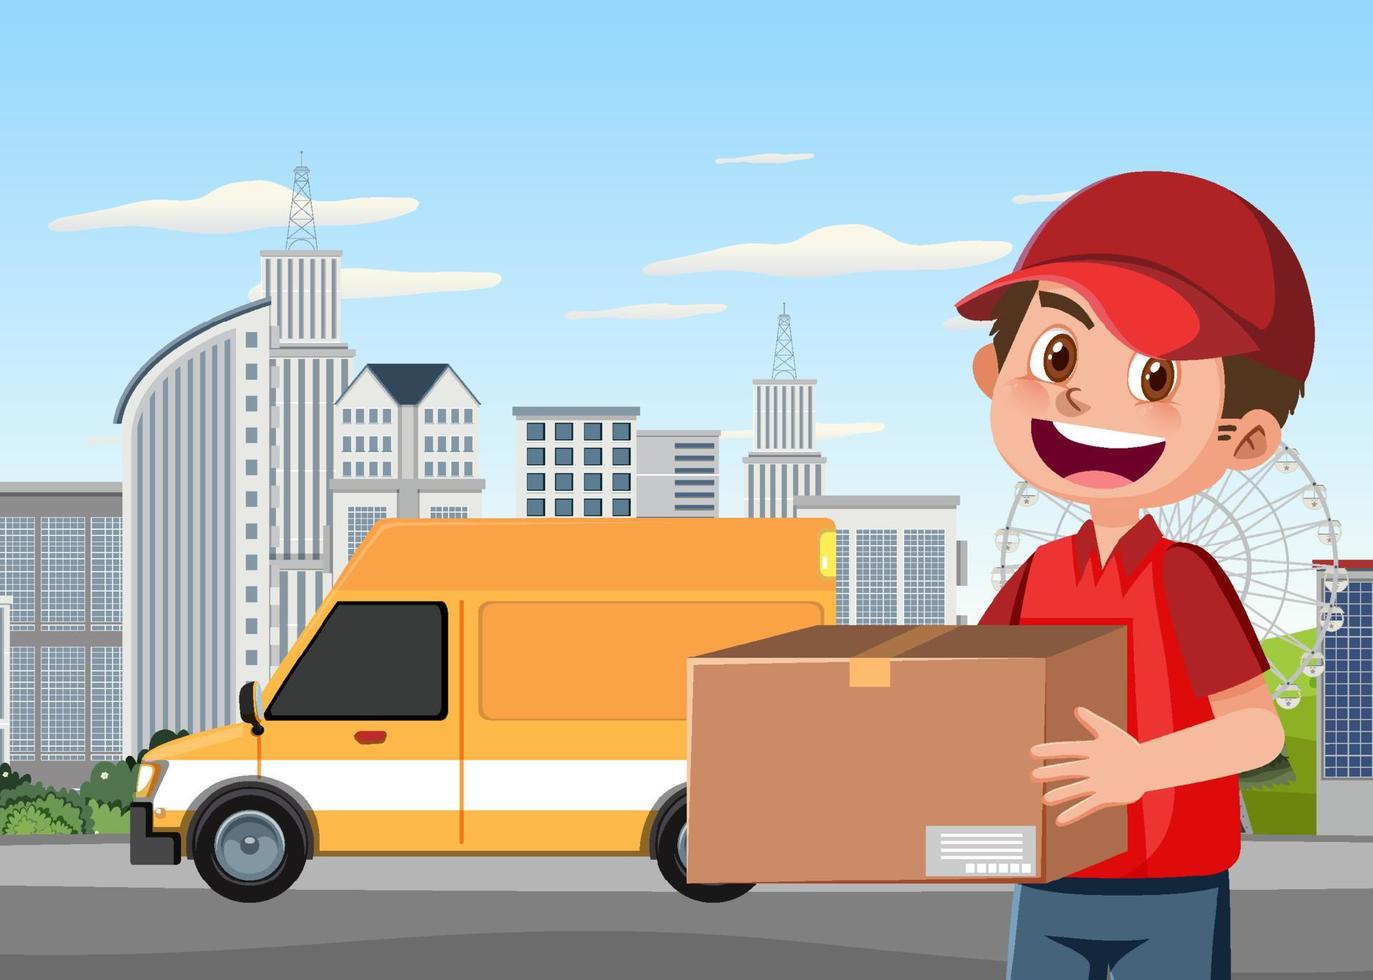 Delivery man with package in the town vector